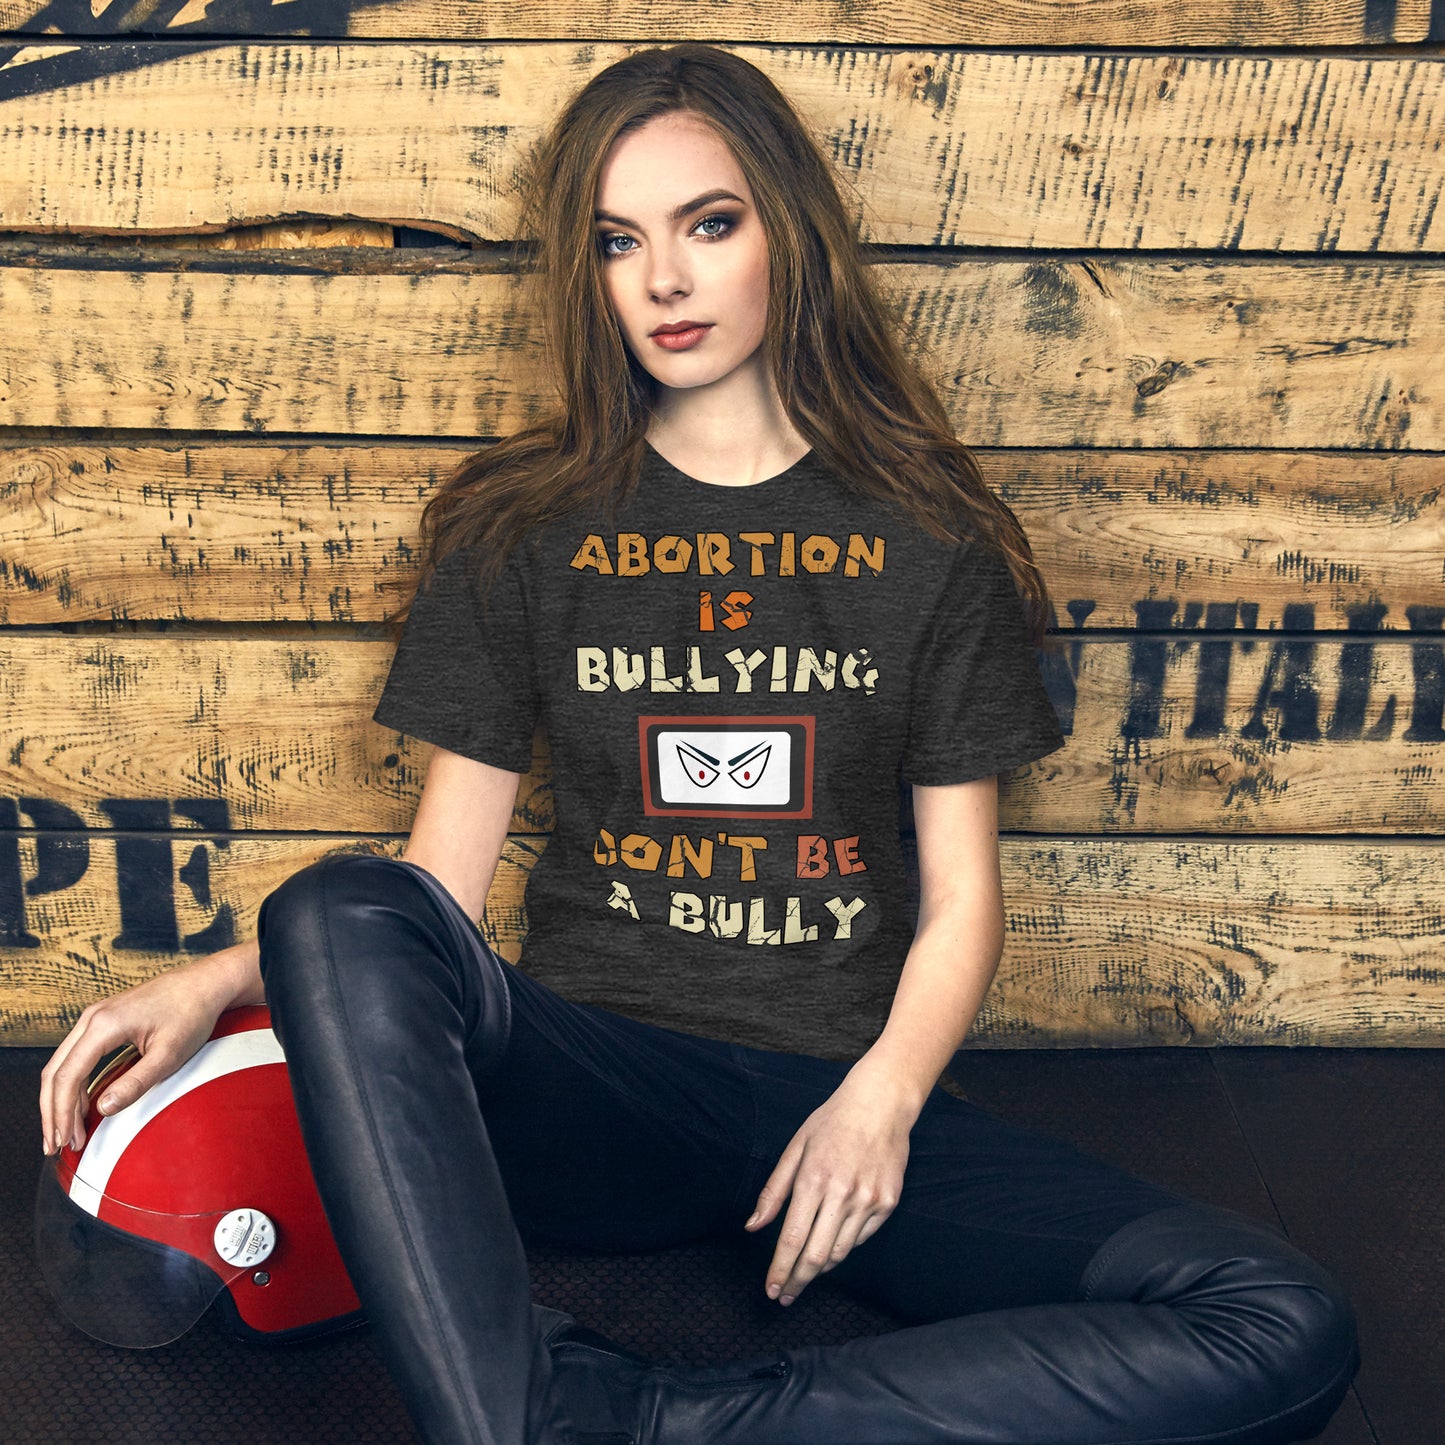 A001 T-shirt - Bella + Canvas 3001 Unisex T-shirt Featuring Sinister Eyes Graphic with text “Abortion is Bullying. Don’t be a Bully.”